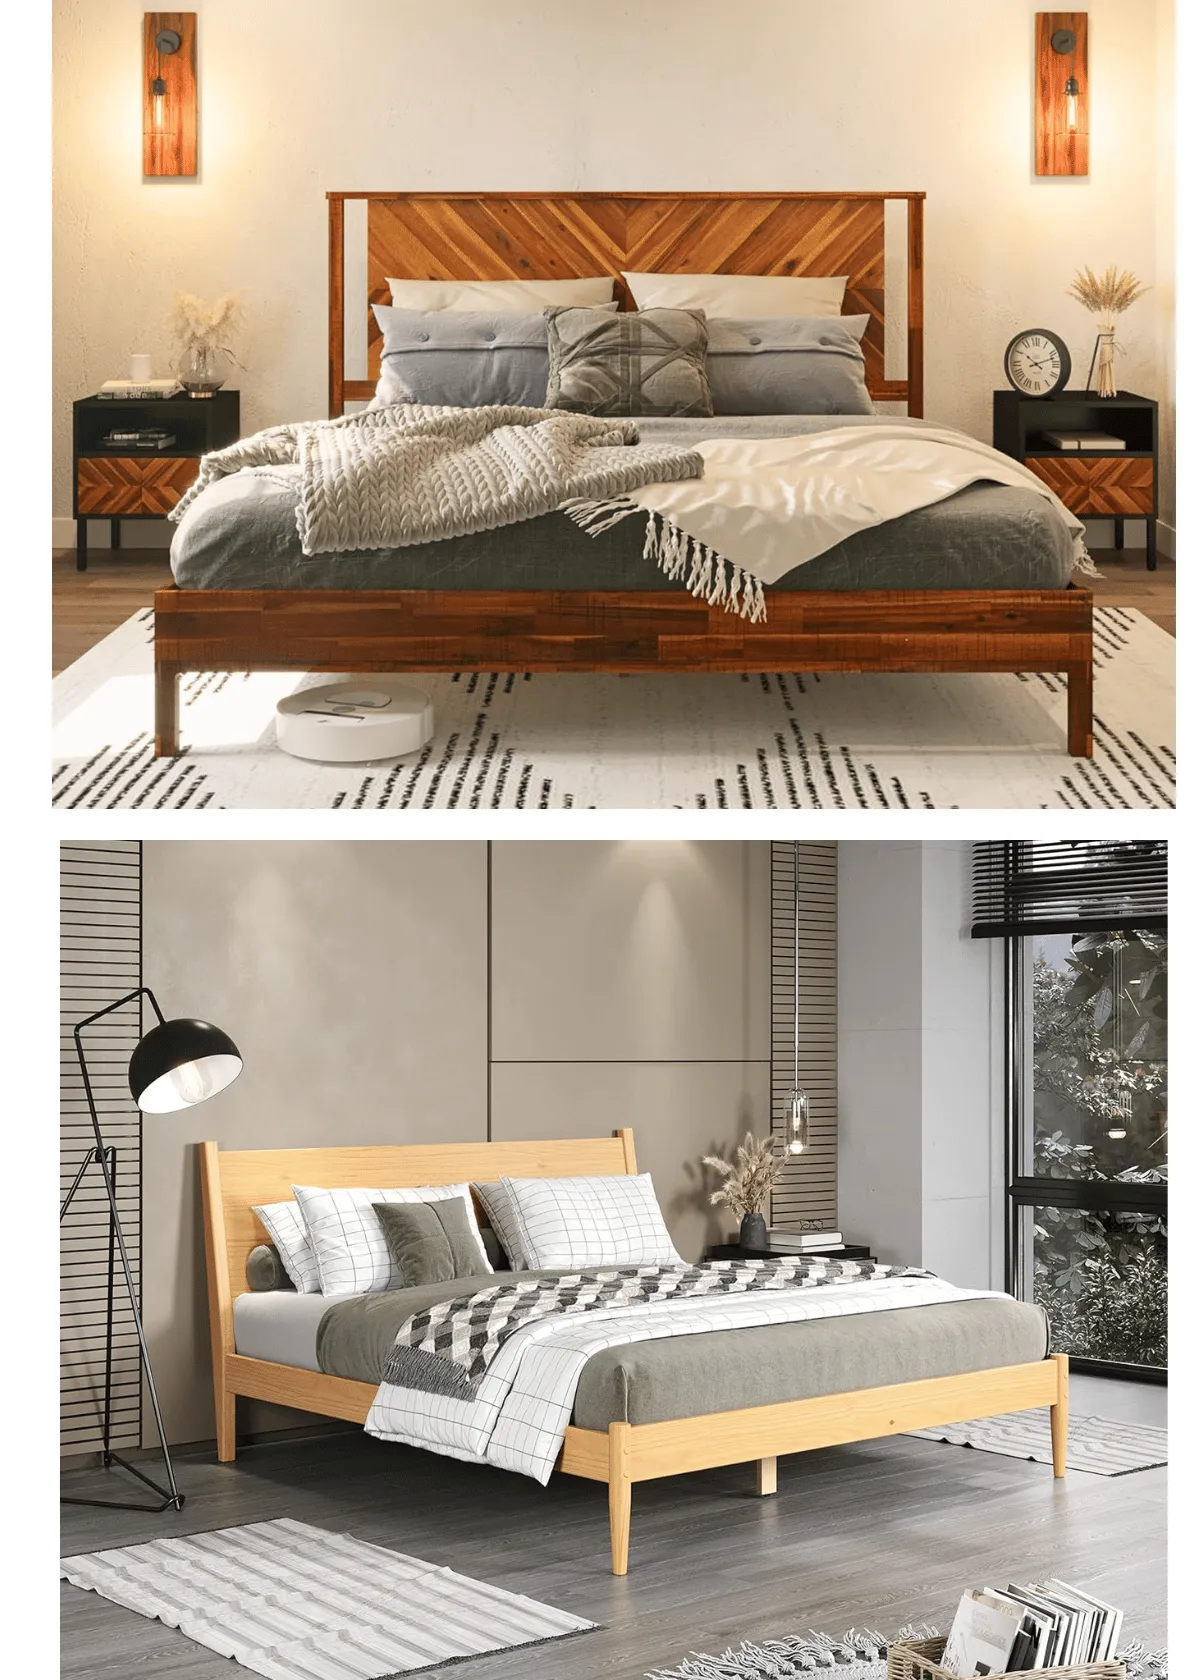 "Luxury Scandinavian Bed Frame: A Buyer’s Guide to Simplicity"